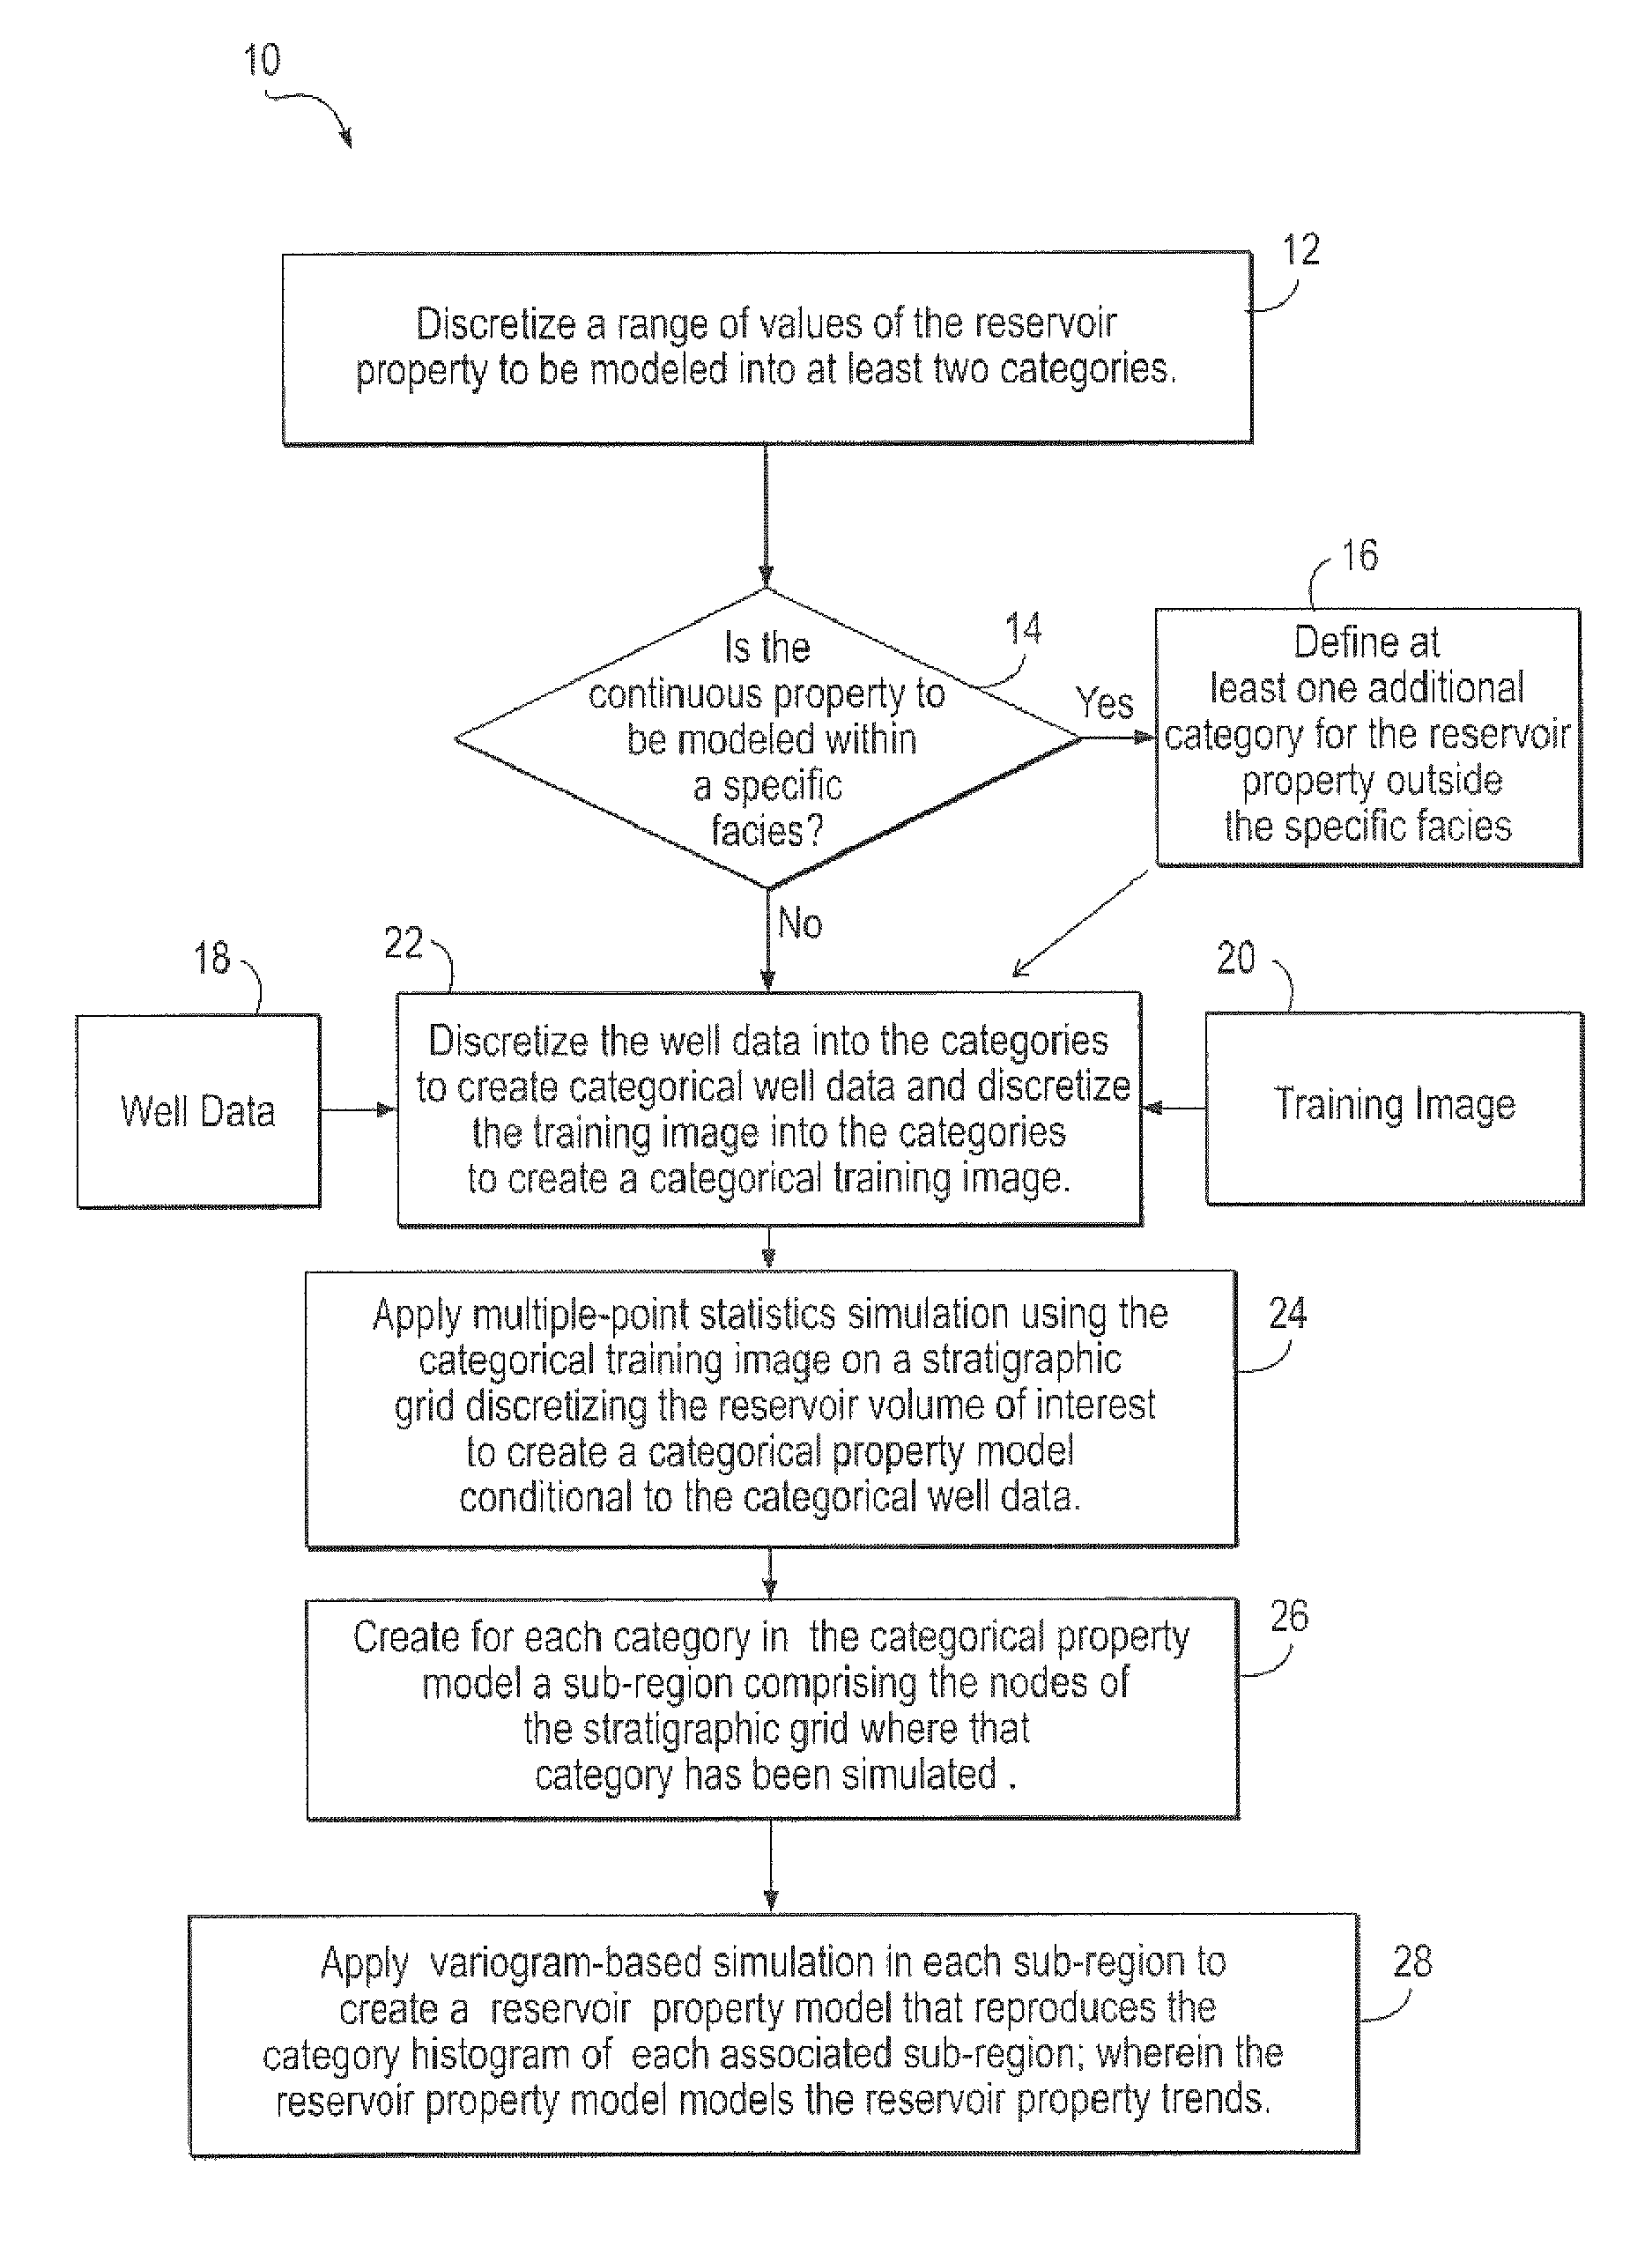 Method and system for using multiple-point statistics simulation to model reservoir property trends